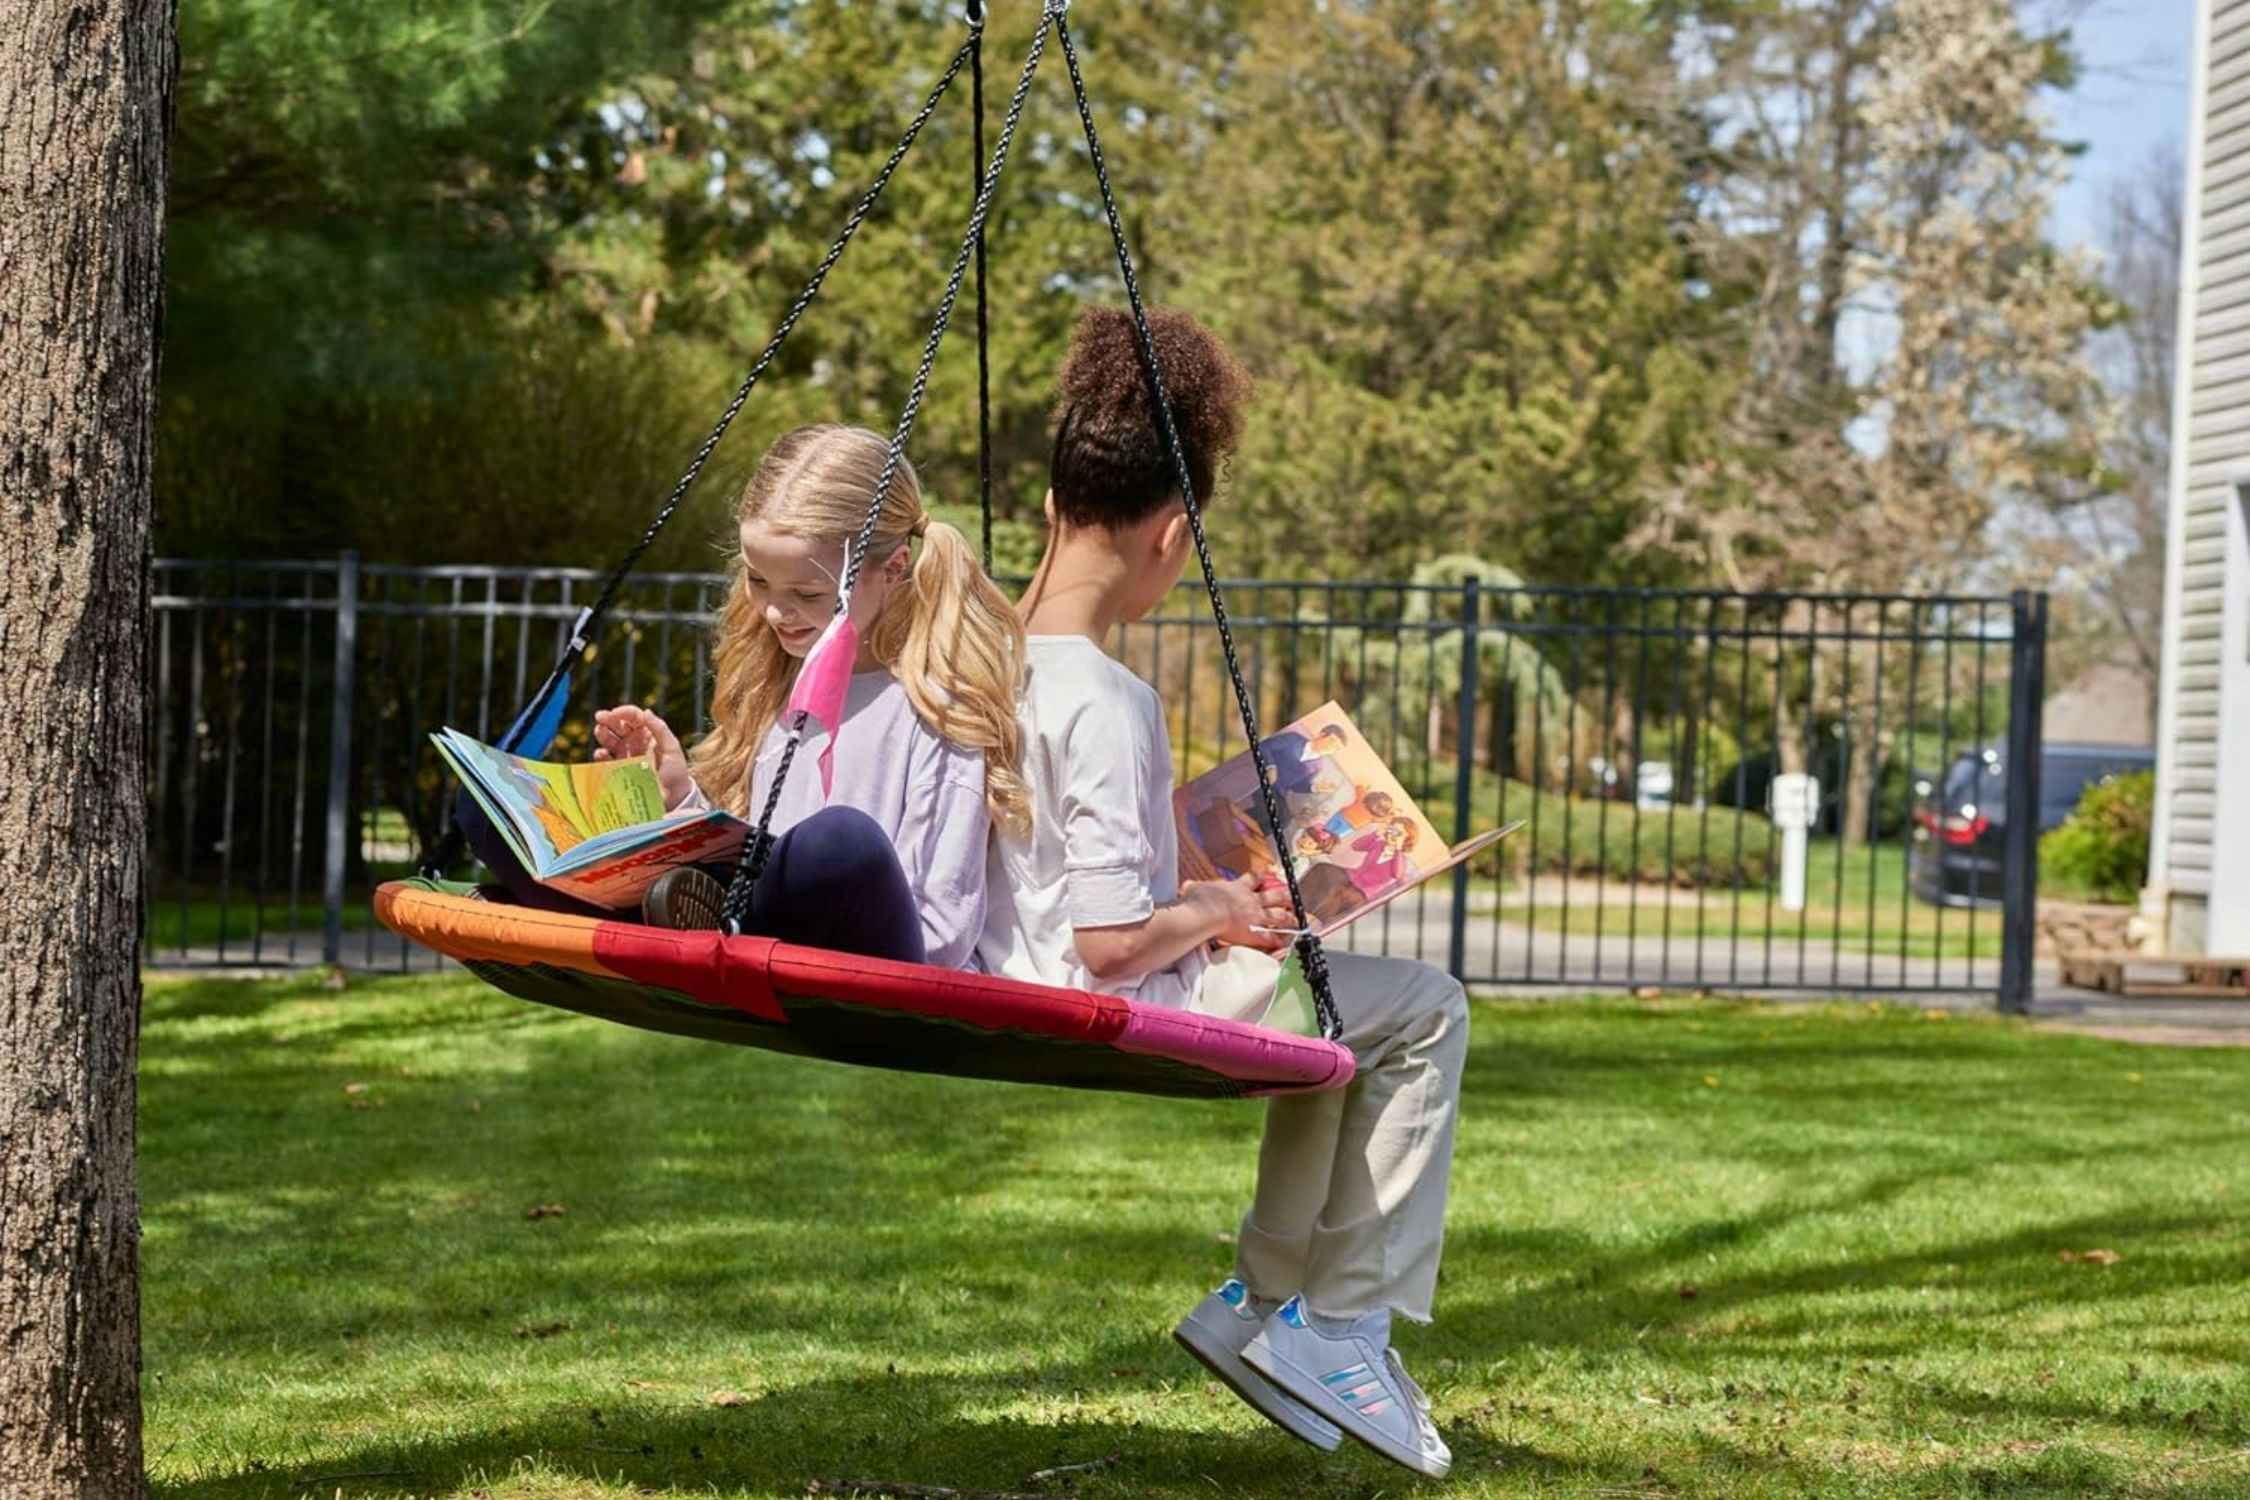 Get a 40-Inch Saucer Swing for Just $45 on Amazon (Reg. $60)